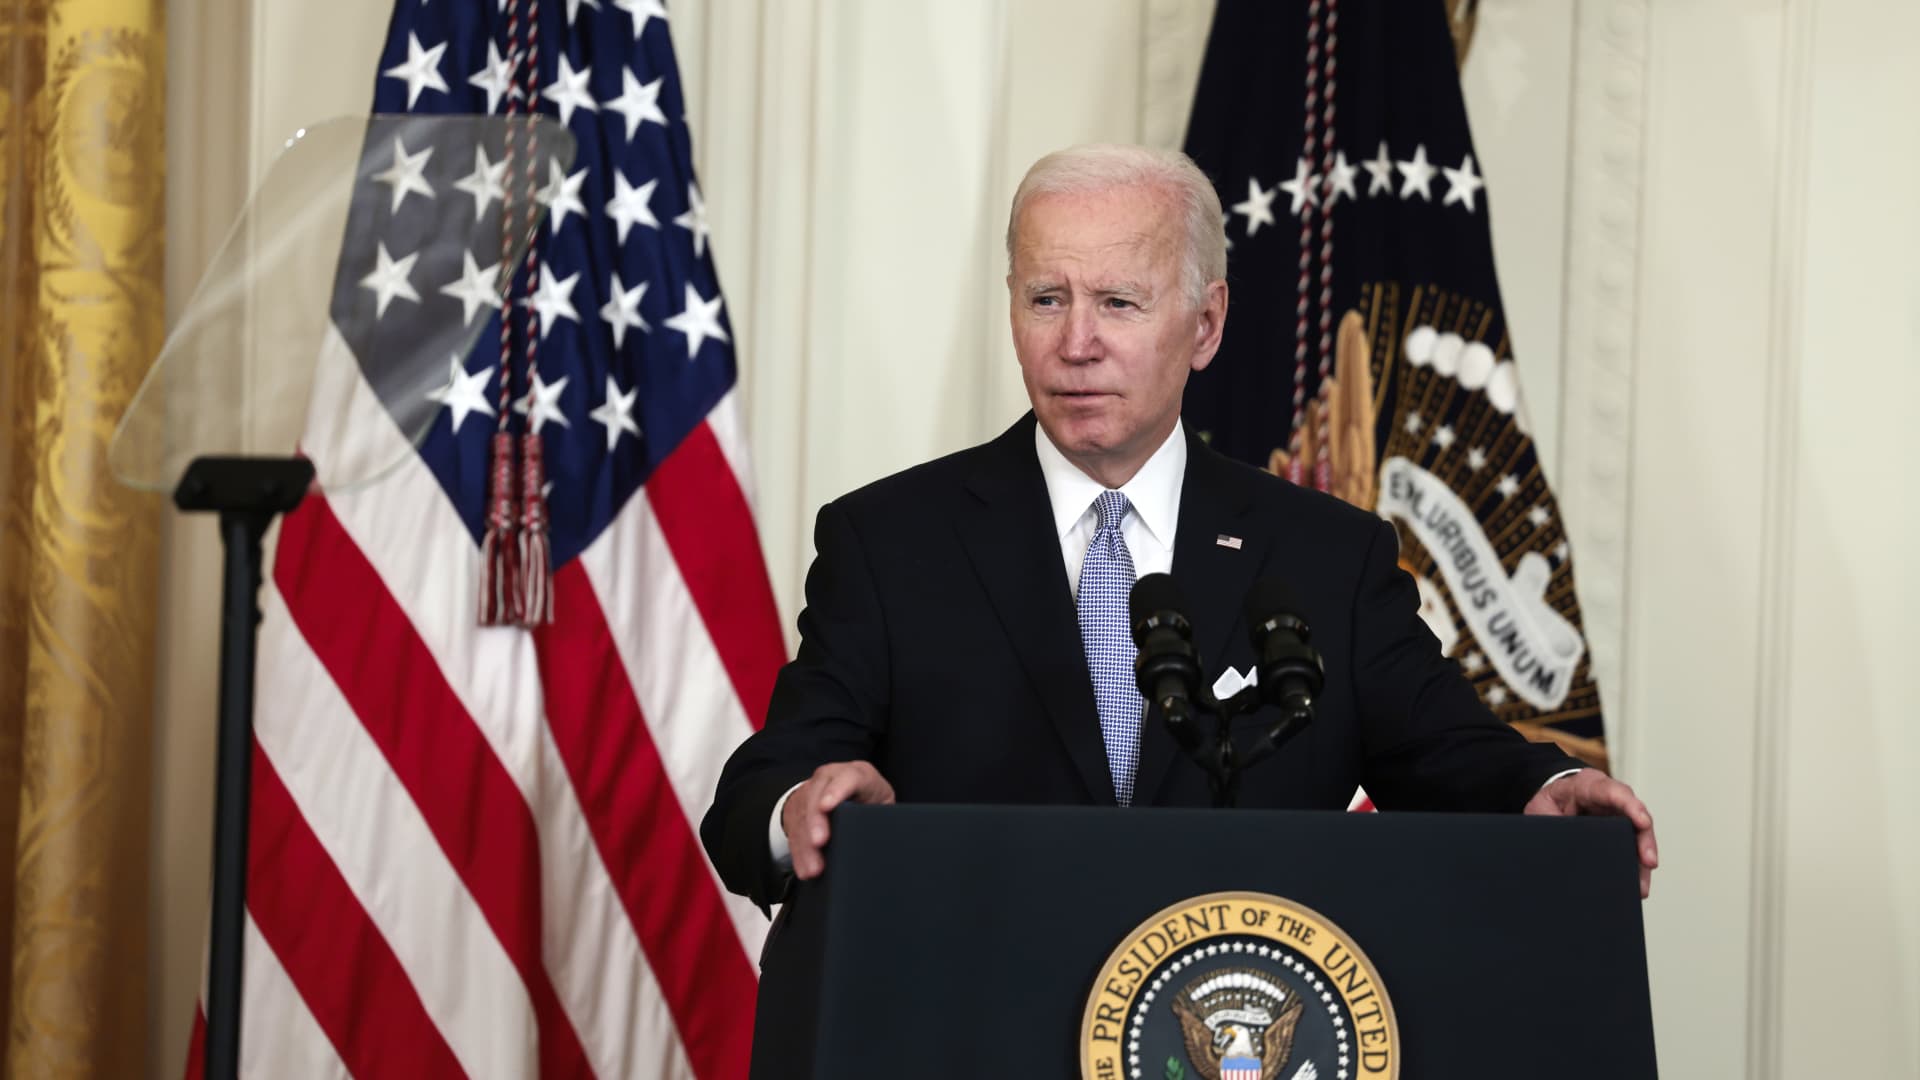 Biden administration cancels $5.8 billion in student loans. More borrowers could see relief soon